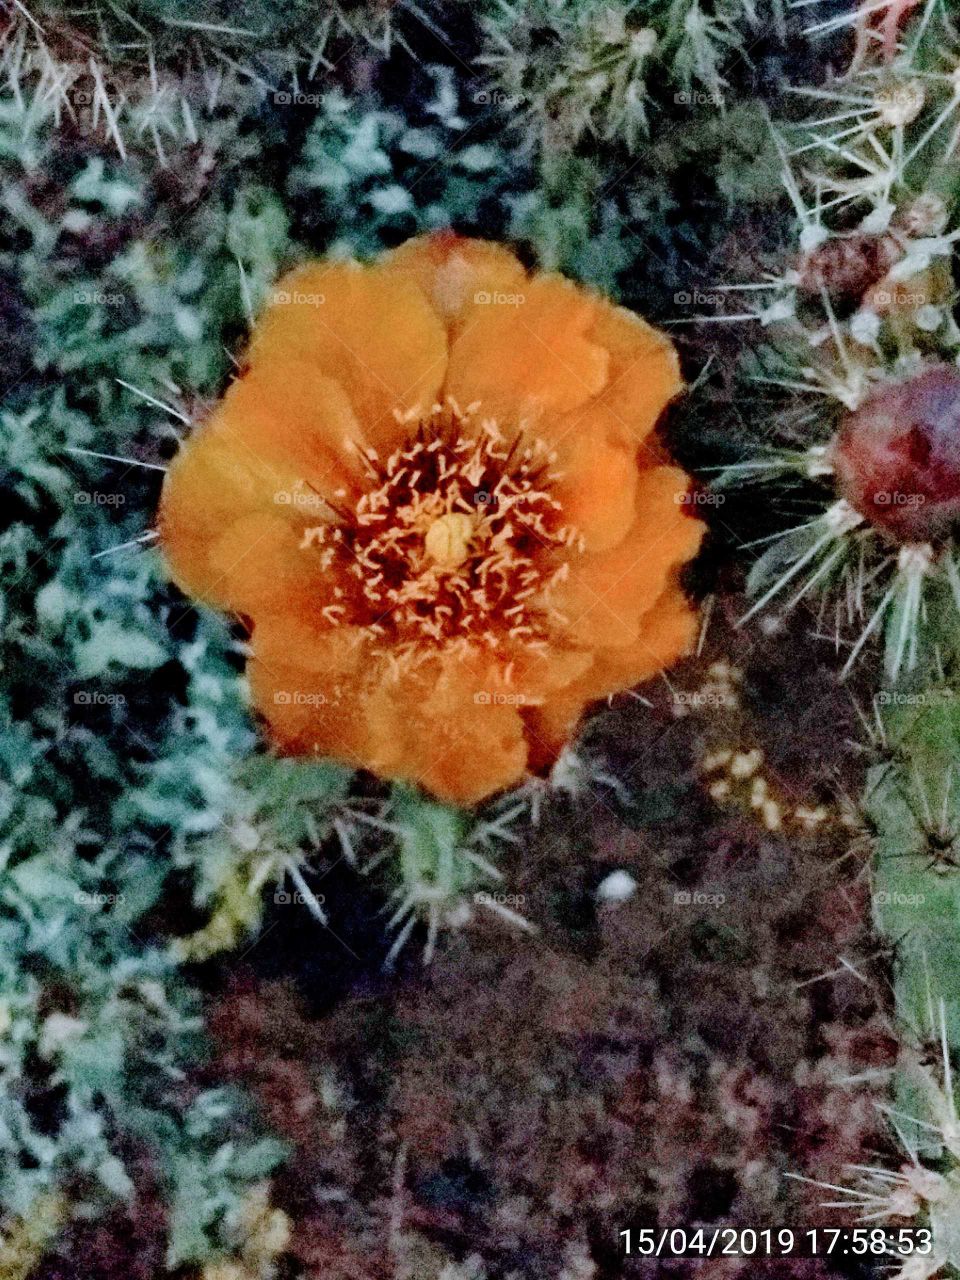 Cholla in bloom